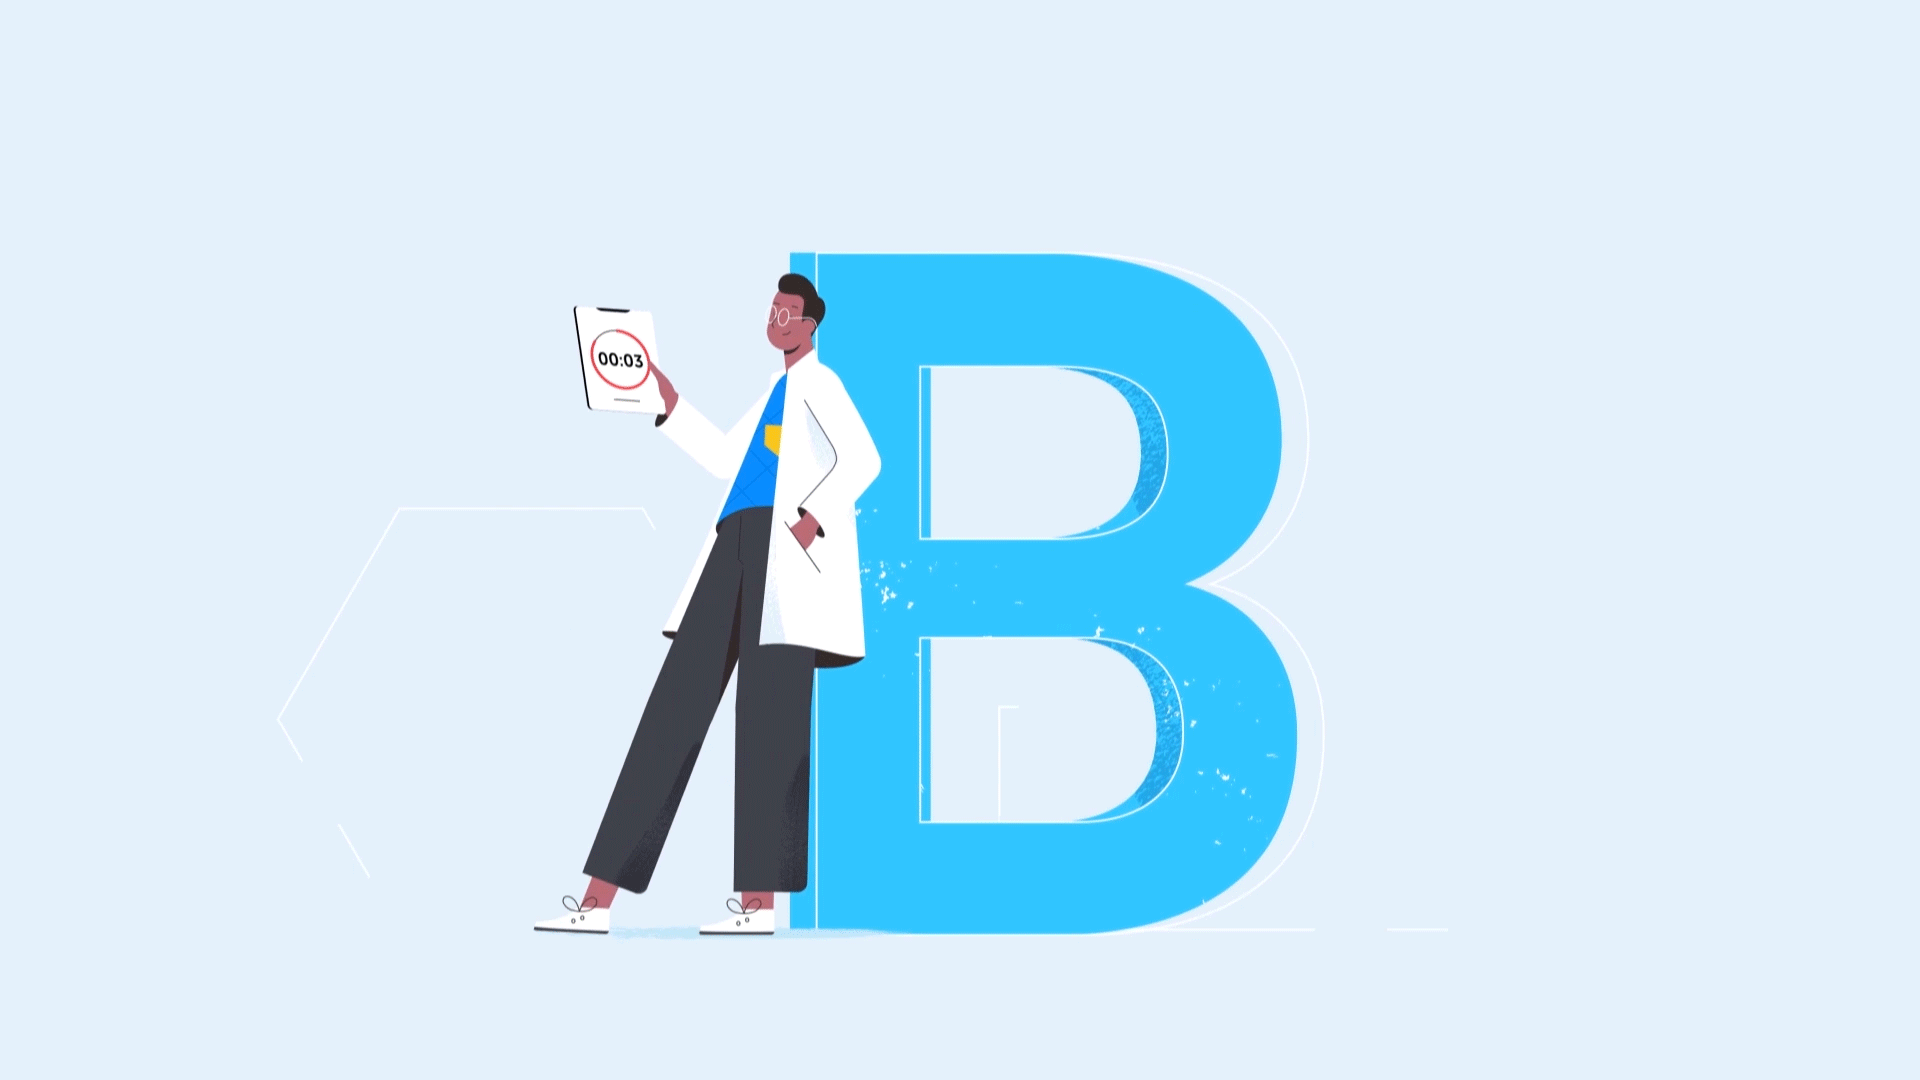 B is for Batch